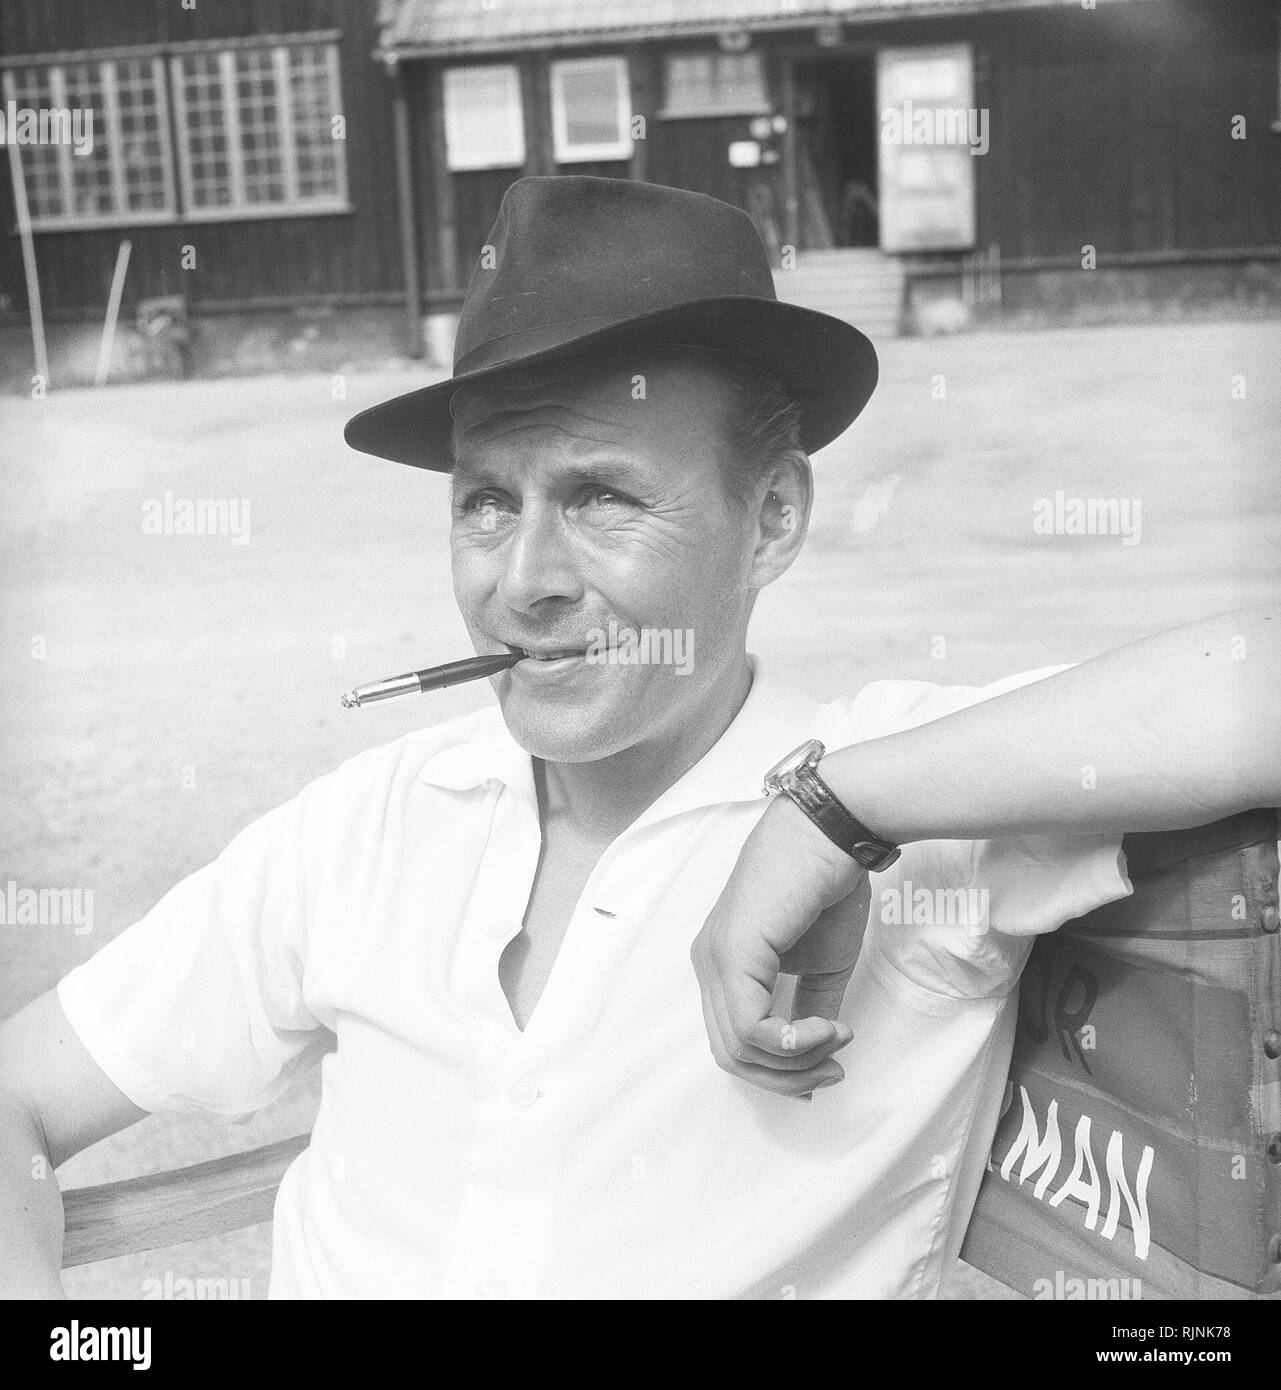 Hat fashion in the 1950s. Actor Hasse Ekman, 1915-2004, wearing a Fedora  type hat. A soft brim and typically creased lengthwise, and pinched near  the front on both sides. Sweden 1950s Photo